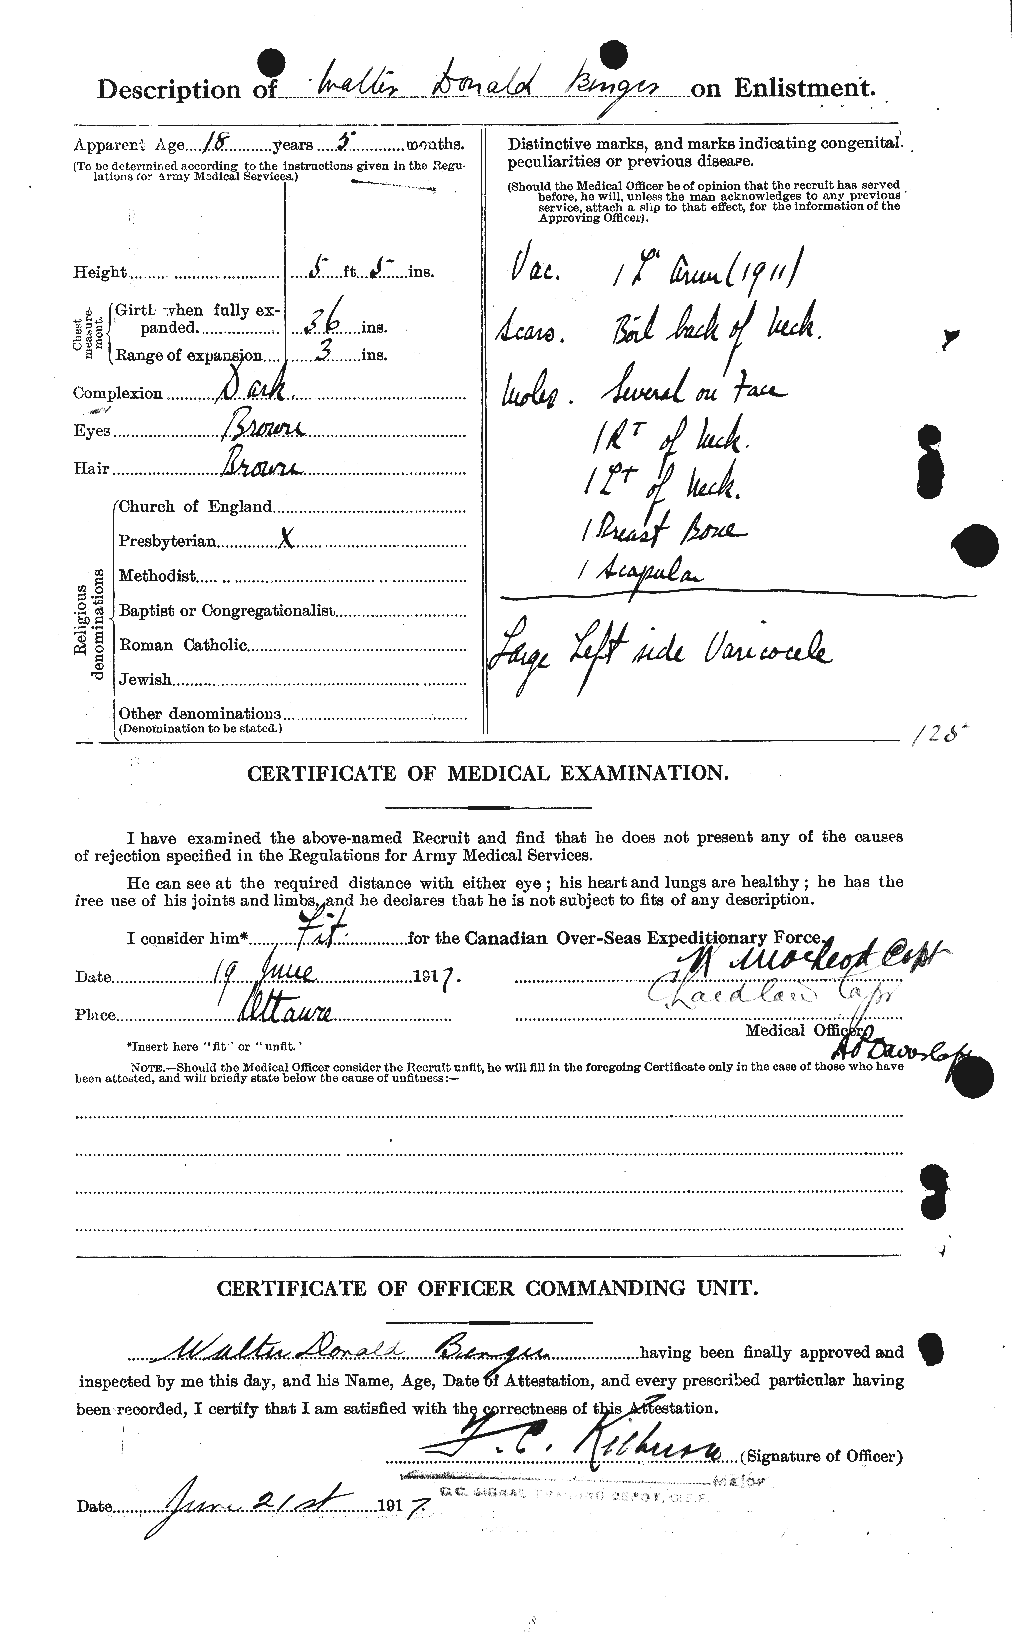 Personnel Records of the First World War - CEF 233115a